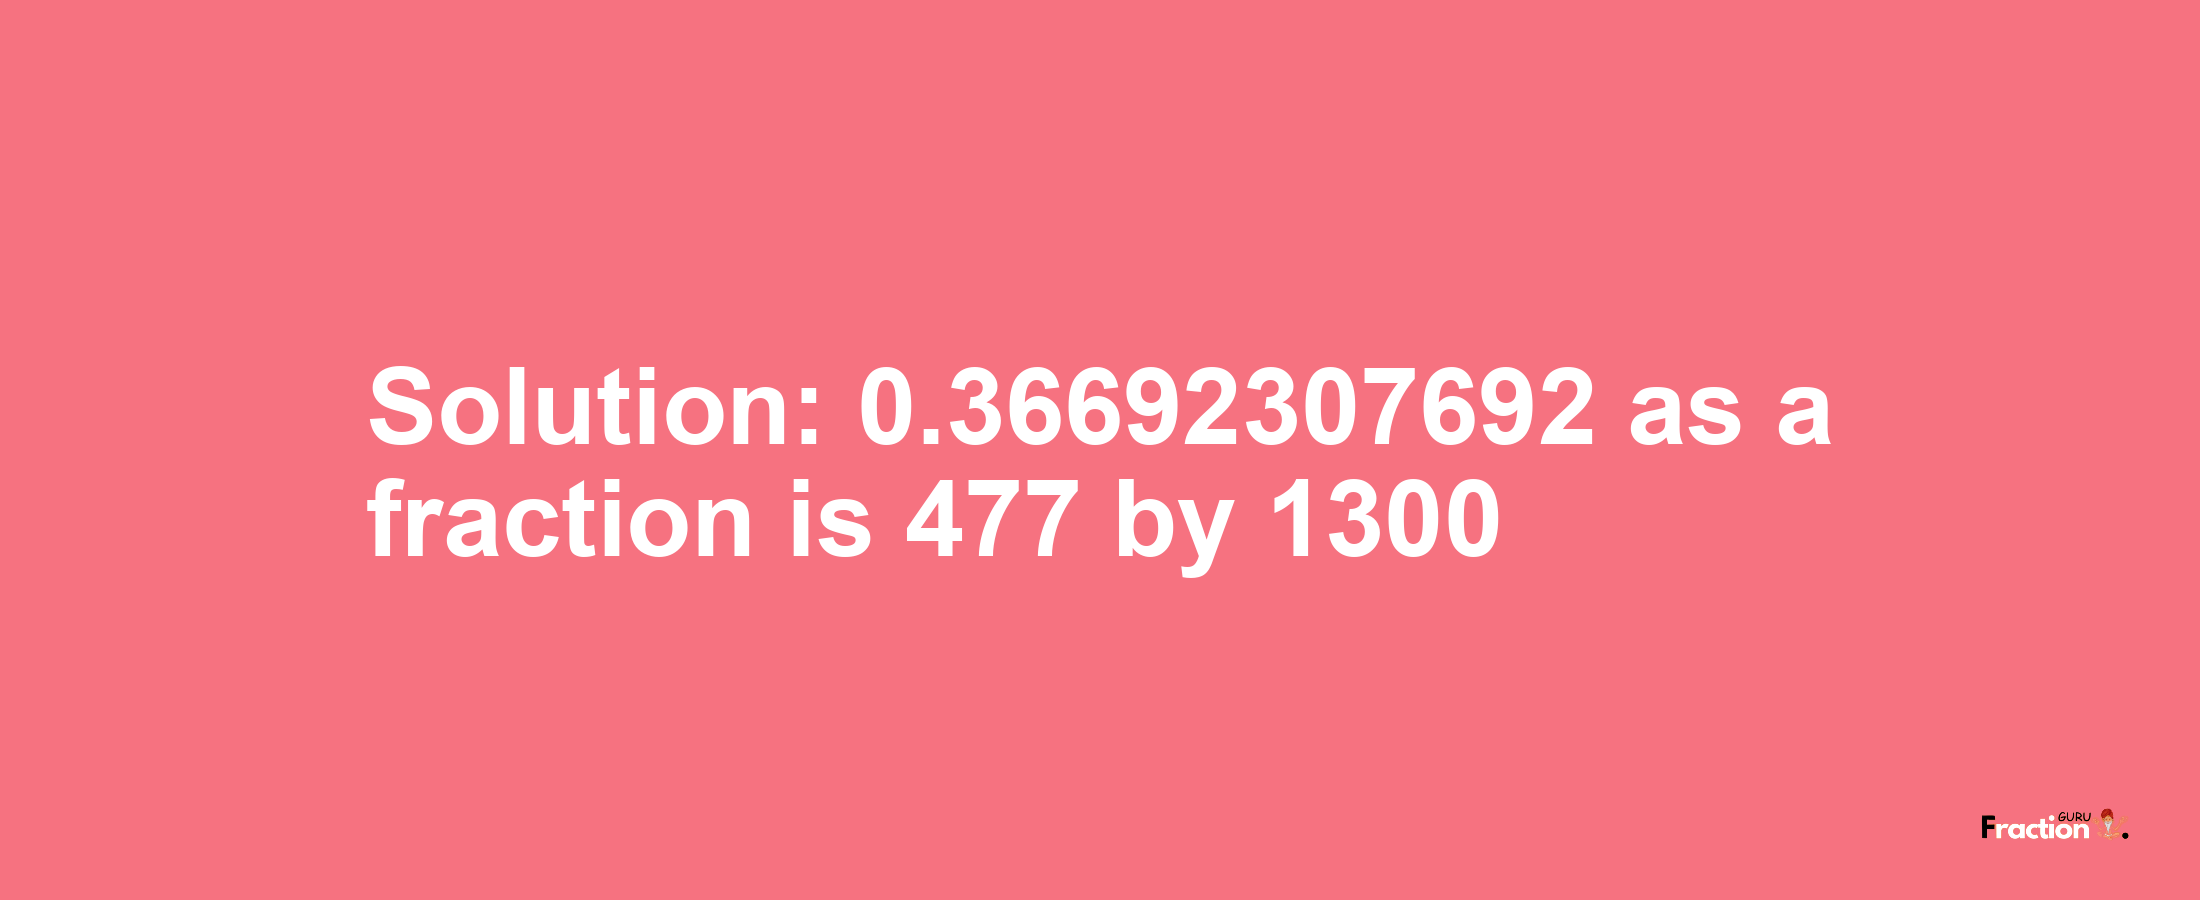 Solution:0.36692307692 as a fraction is 477/1300